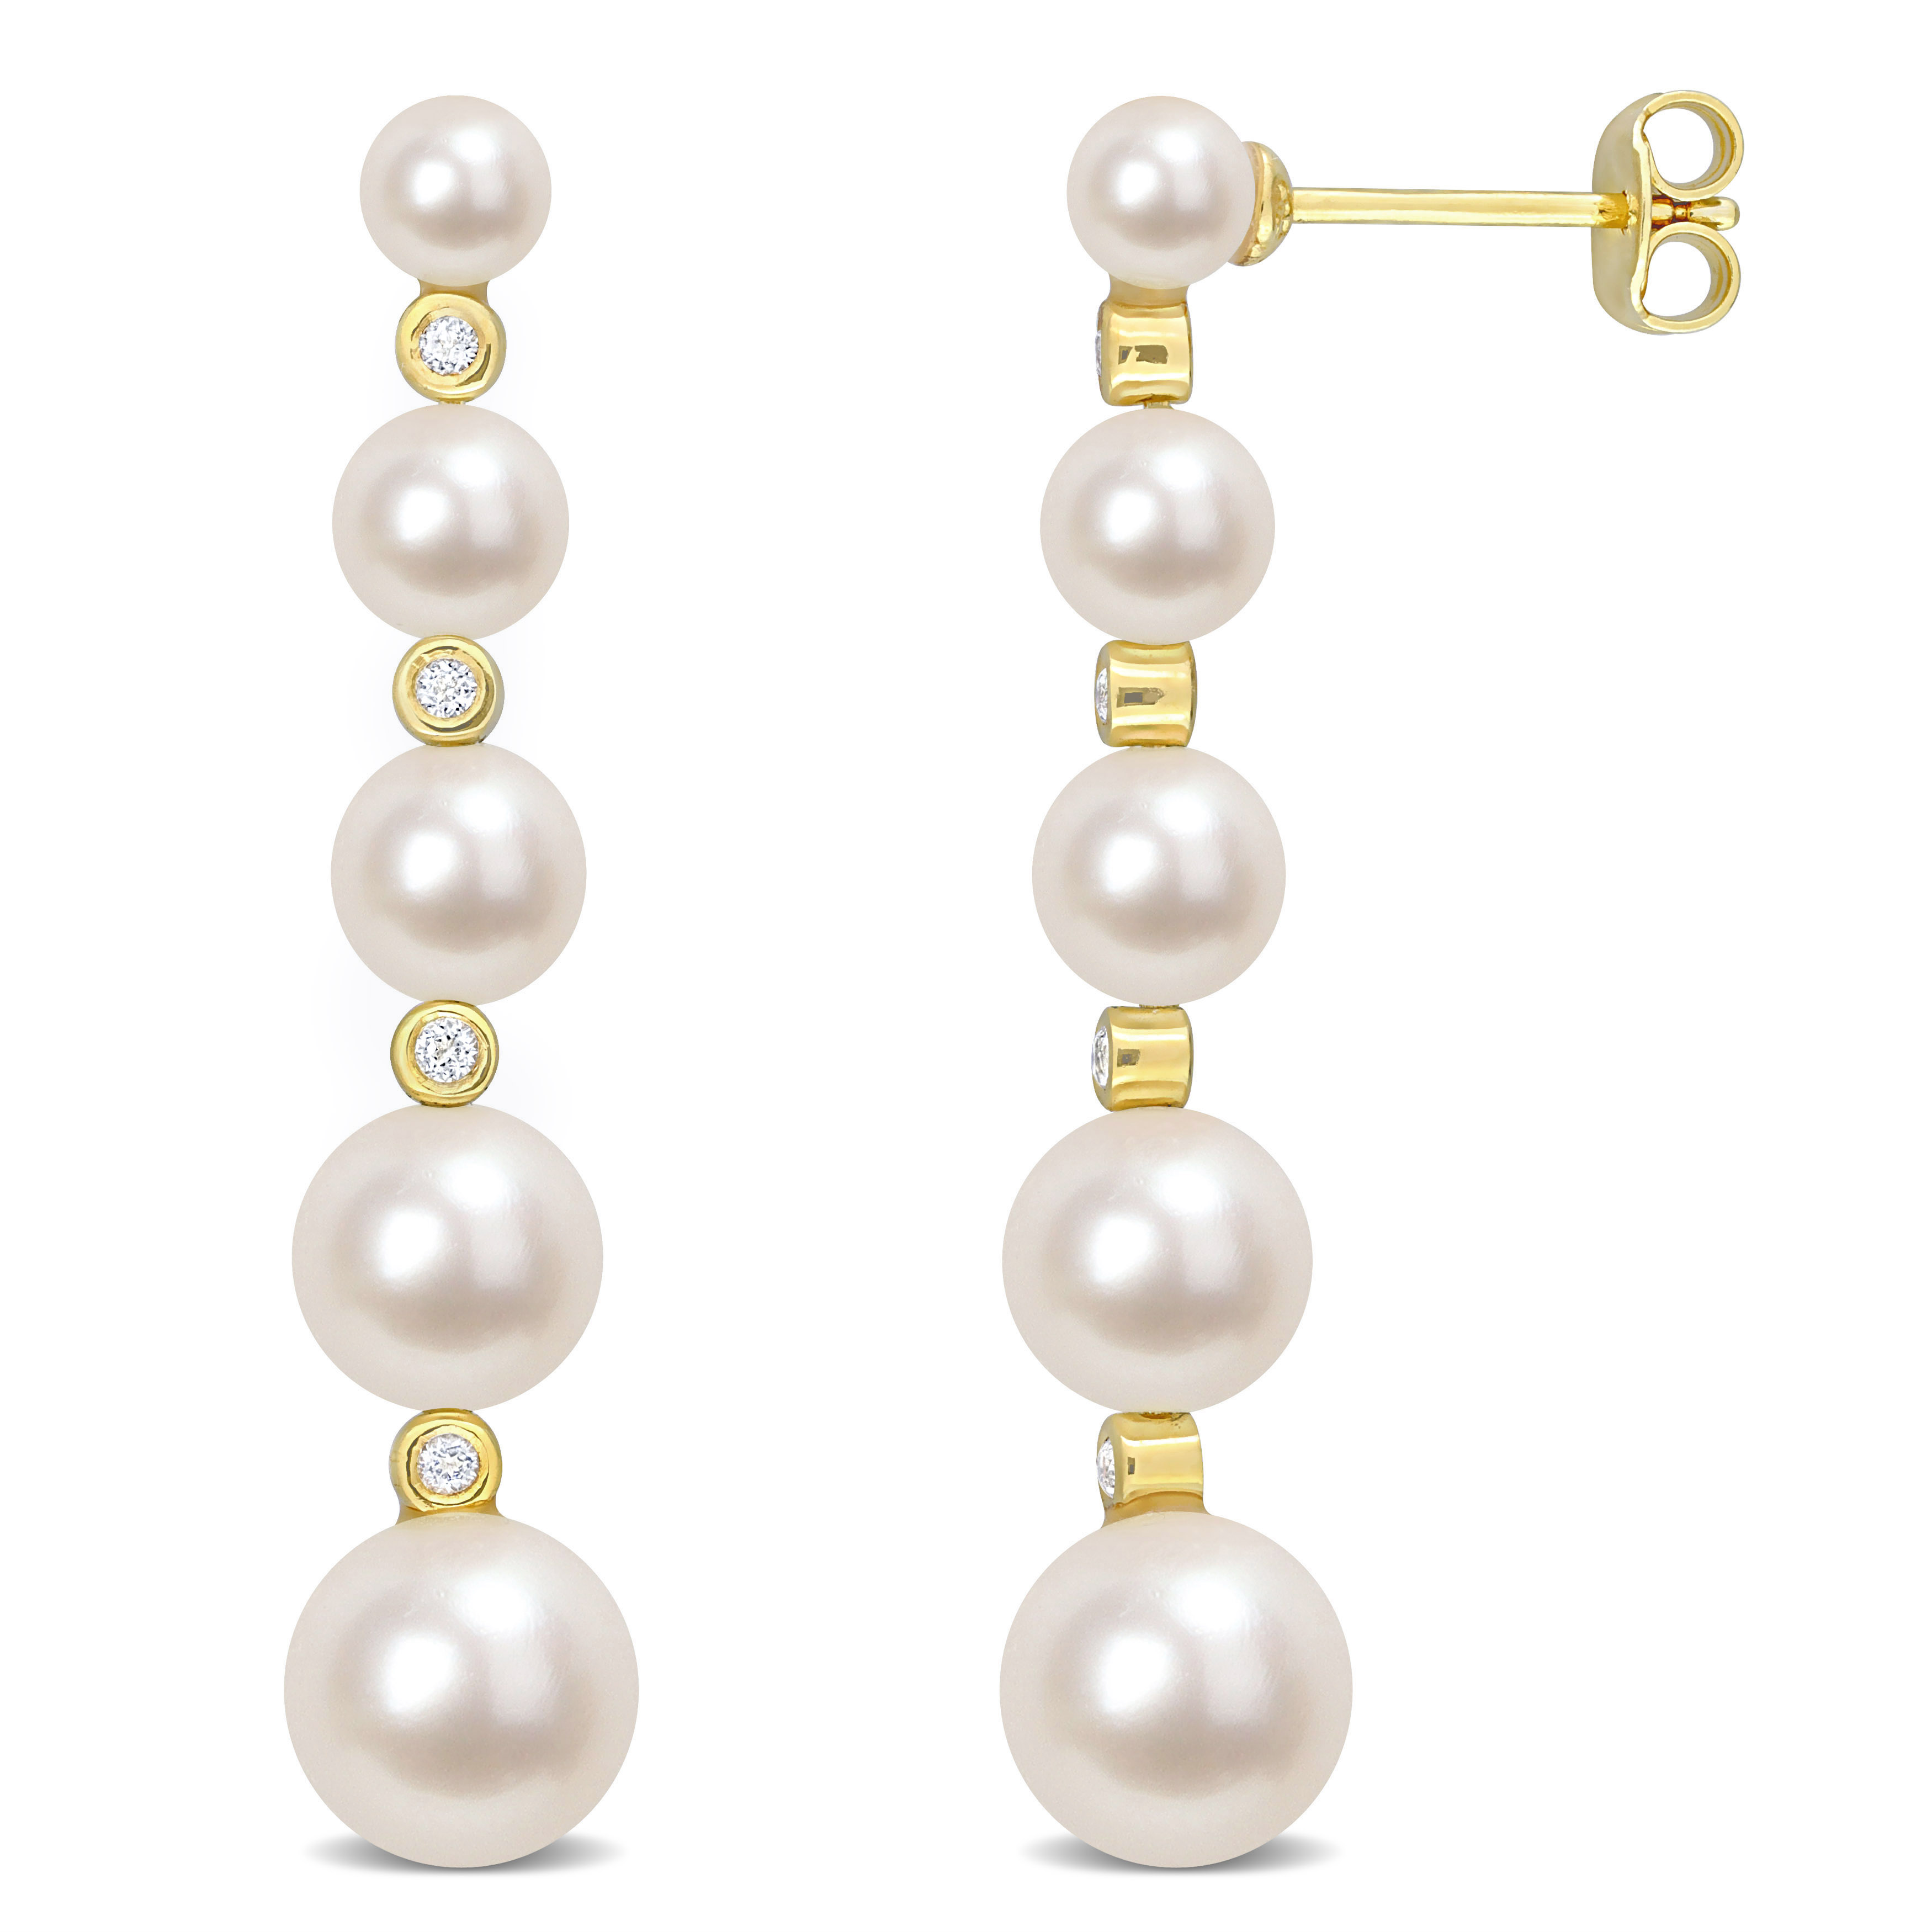 4 - 8.5 MM Freshwater Cultured Pearl and 1/4 CT TGW White Topaz Graduated Dangle Earrings in Yellow Plated Sterling Silver